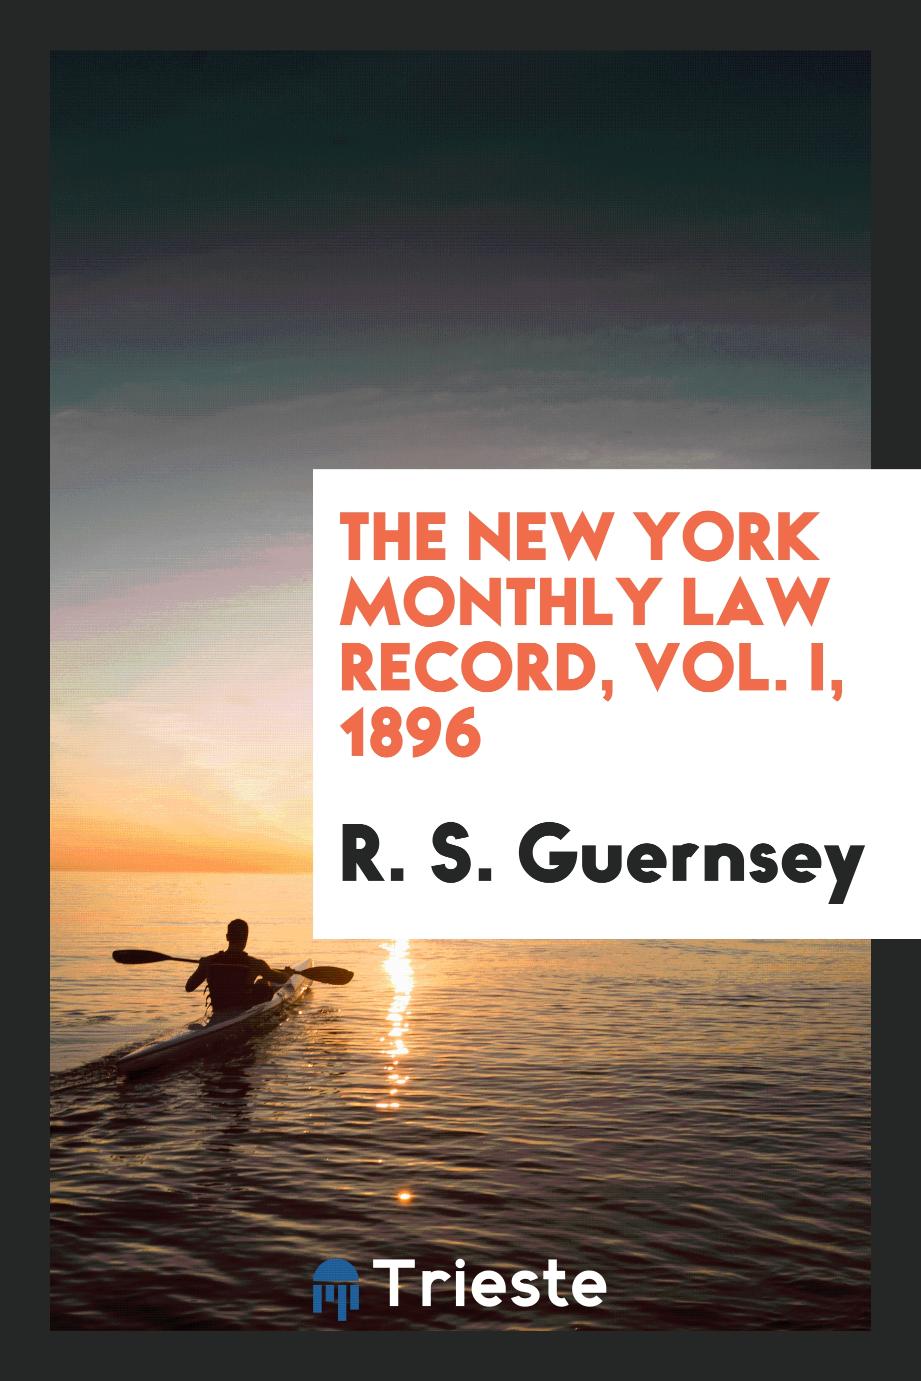 The New York Monthly Law Record, Vol. I, 1896